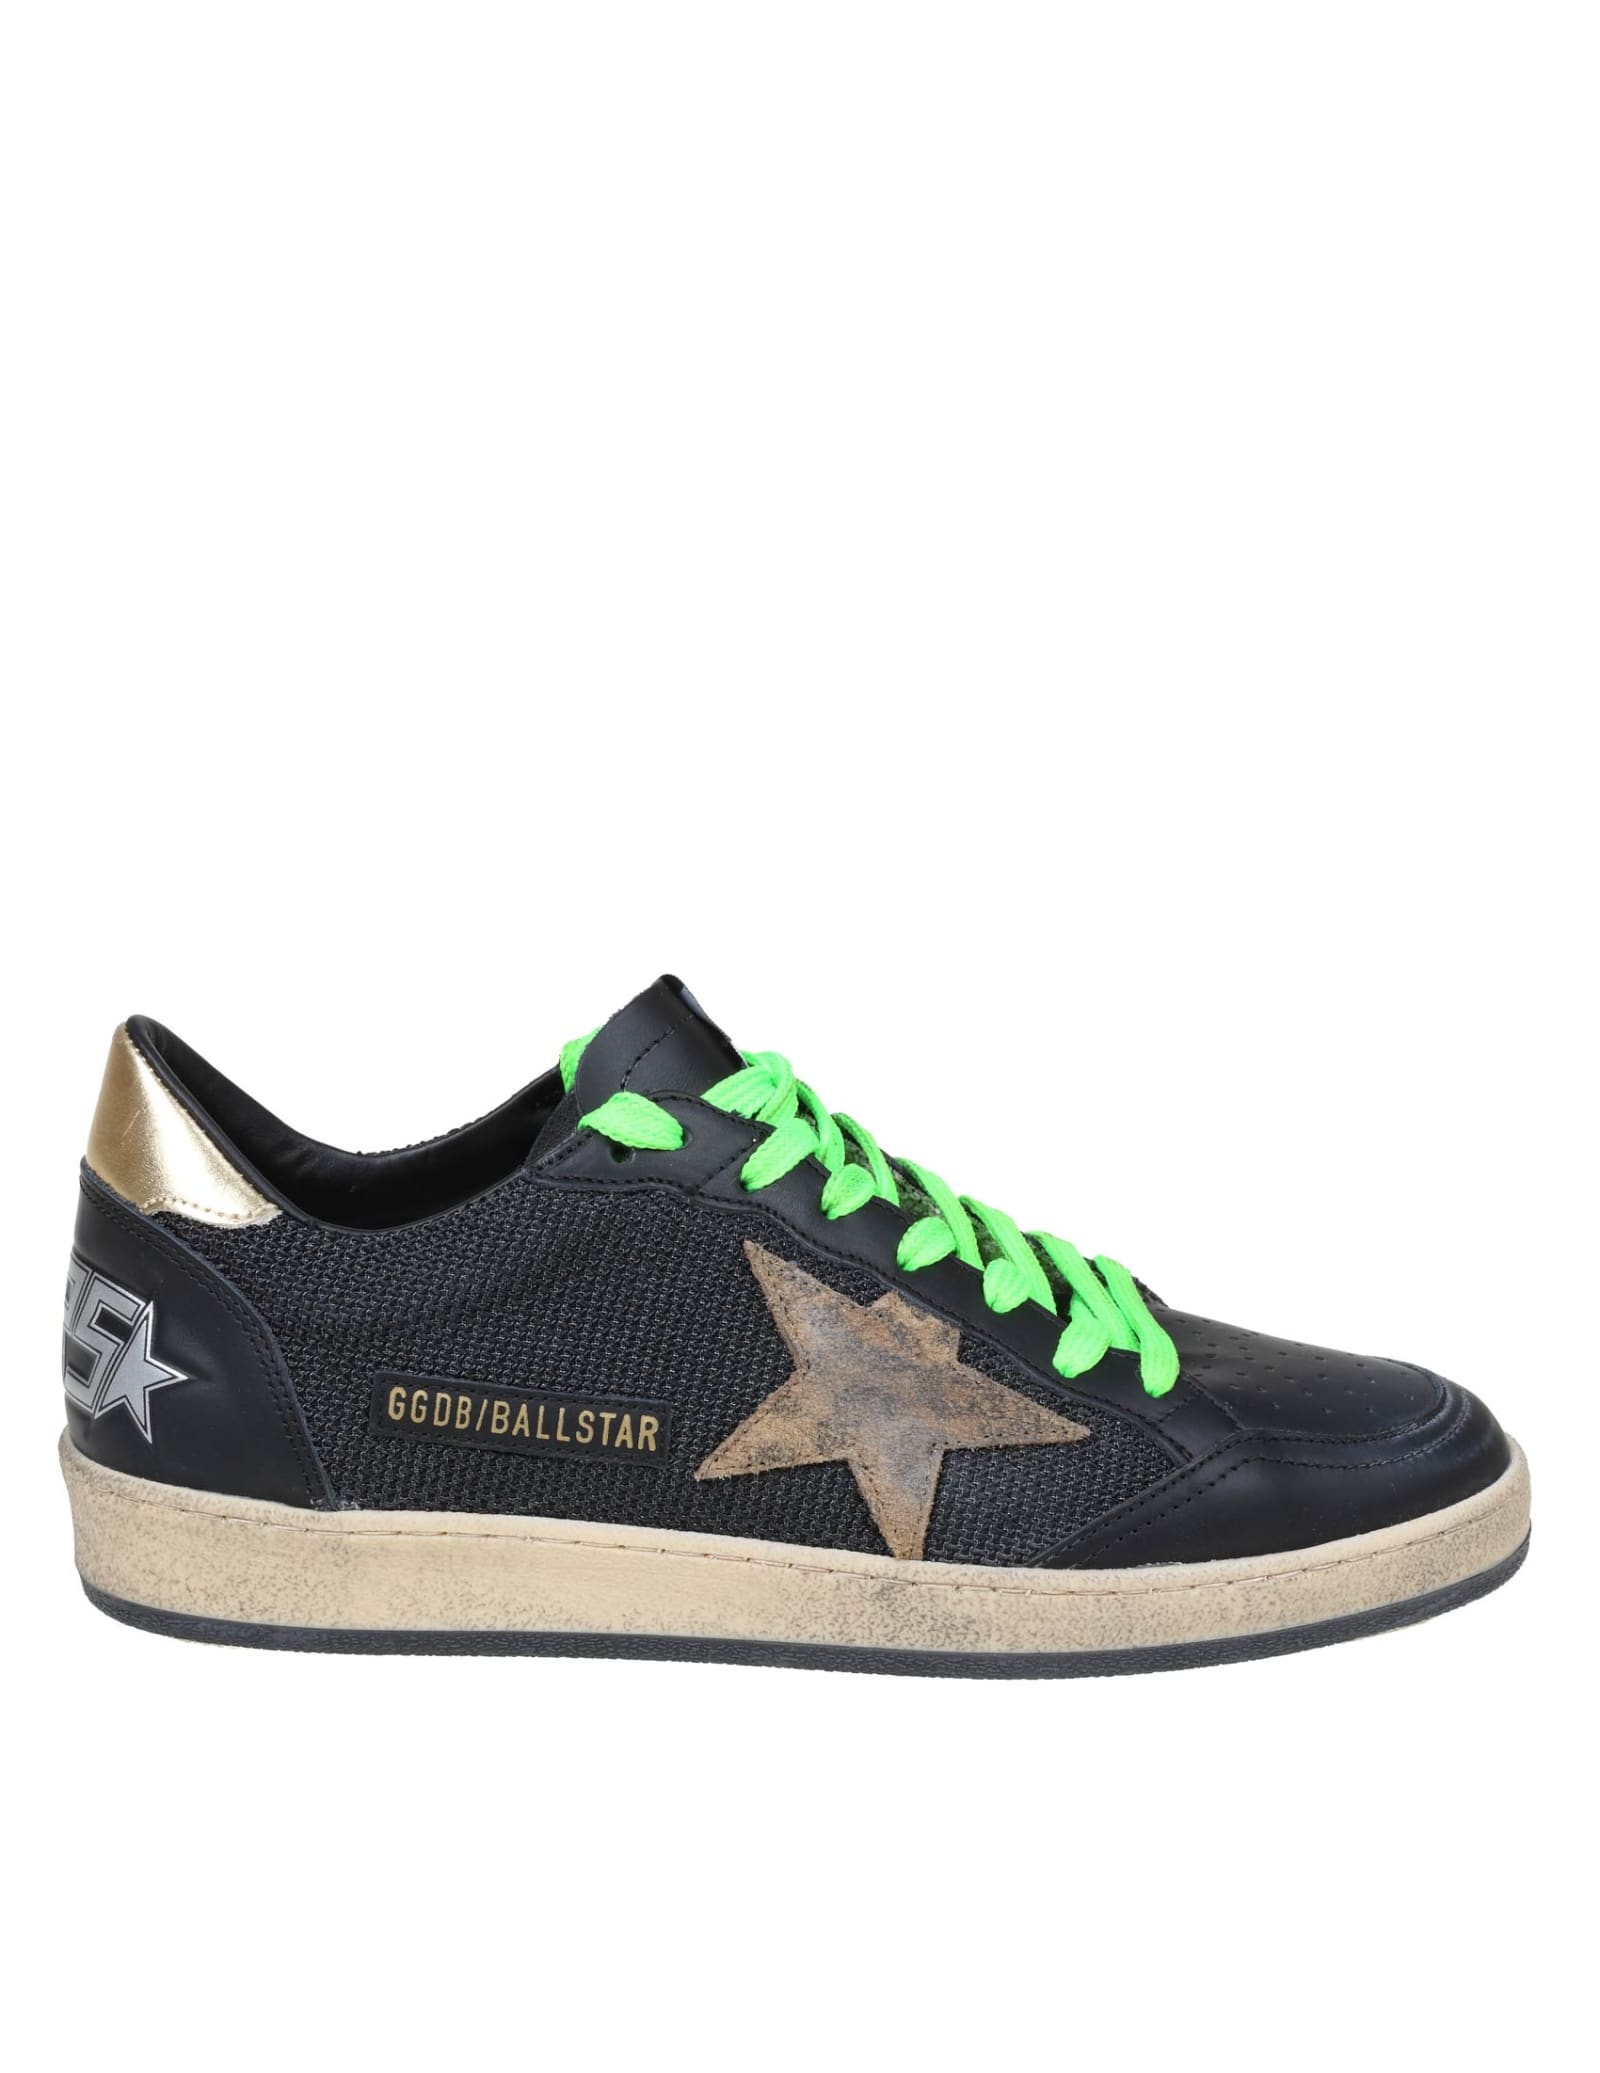 Golden Goose Ball Star Sneakers In Black Leather And Fabric